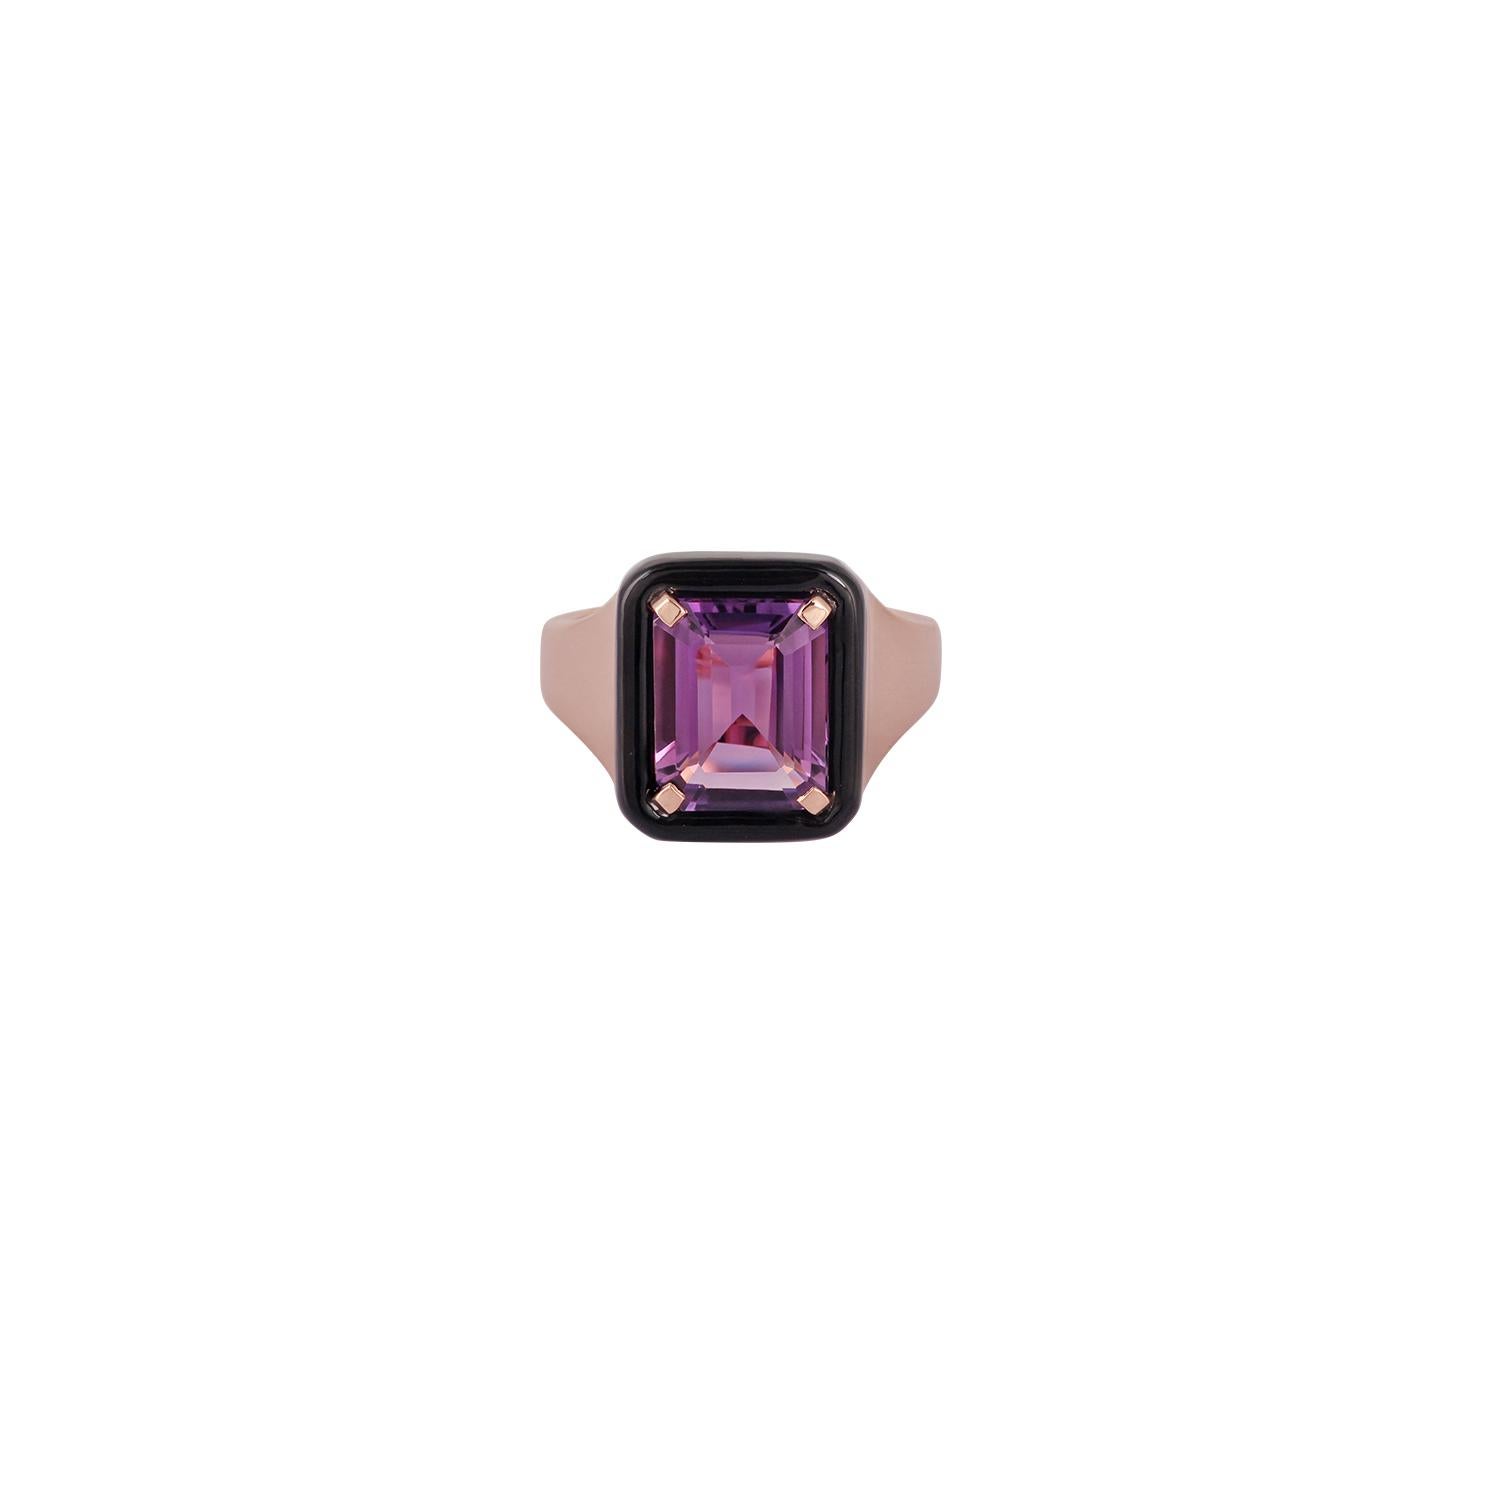 This is an elegant ring studded in 18k yellow gold with 1 piece of octagon shaped amethyst weight 5.71 carat surrounded by the frame of black onyx weight 2.32 carat, this entire ring studded in 18k yellow gold weight 4.98 grams, ring size can be